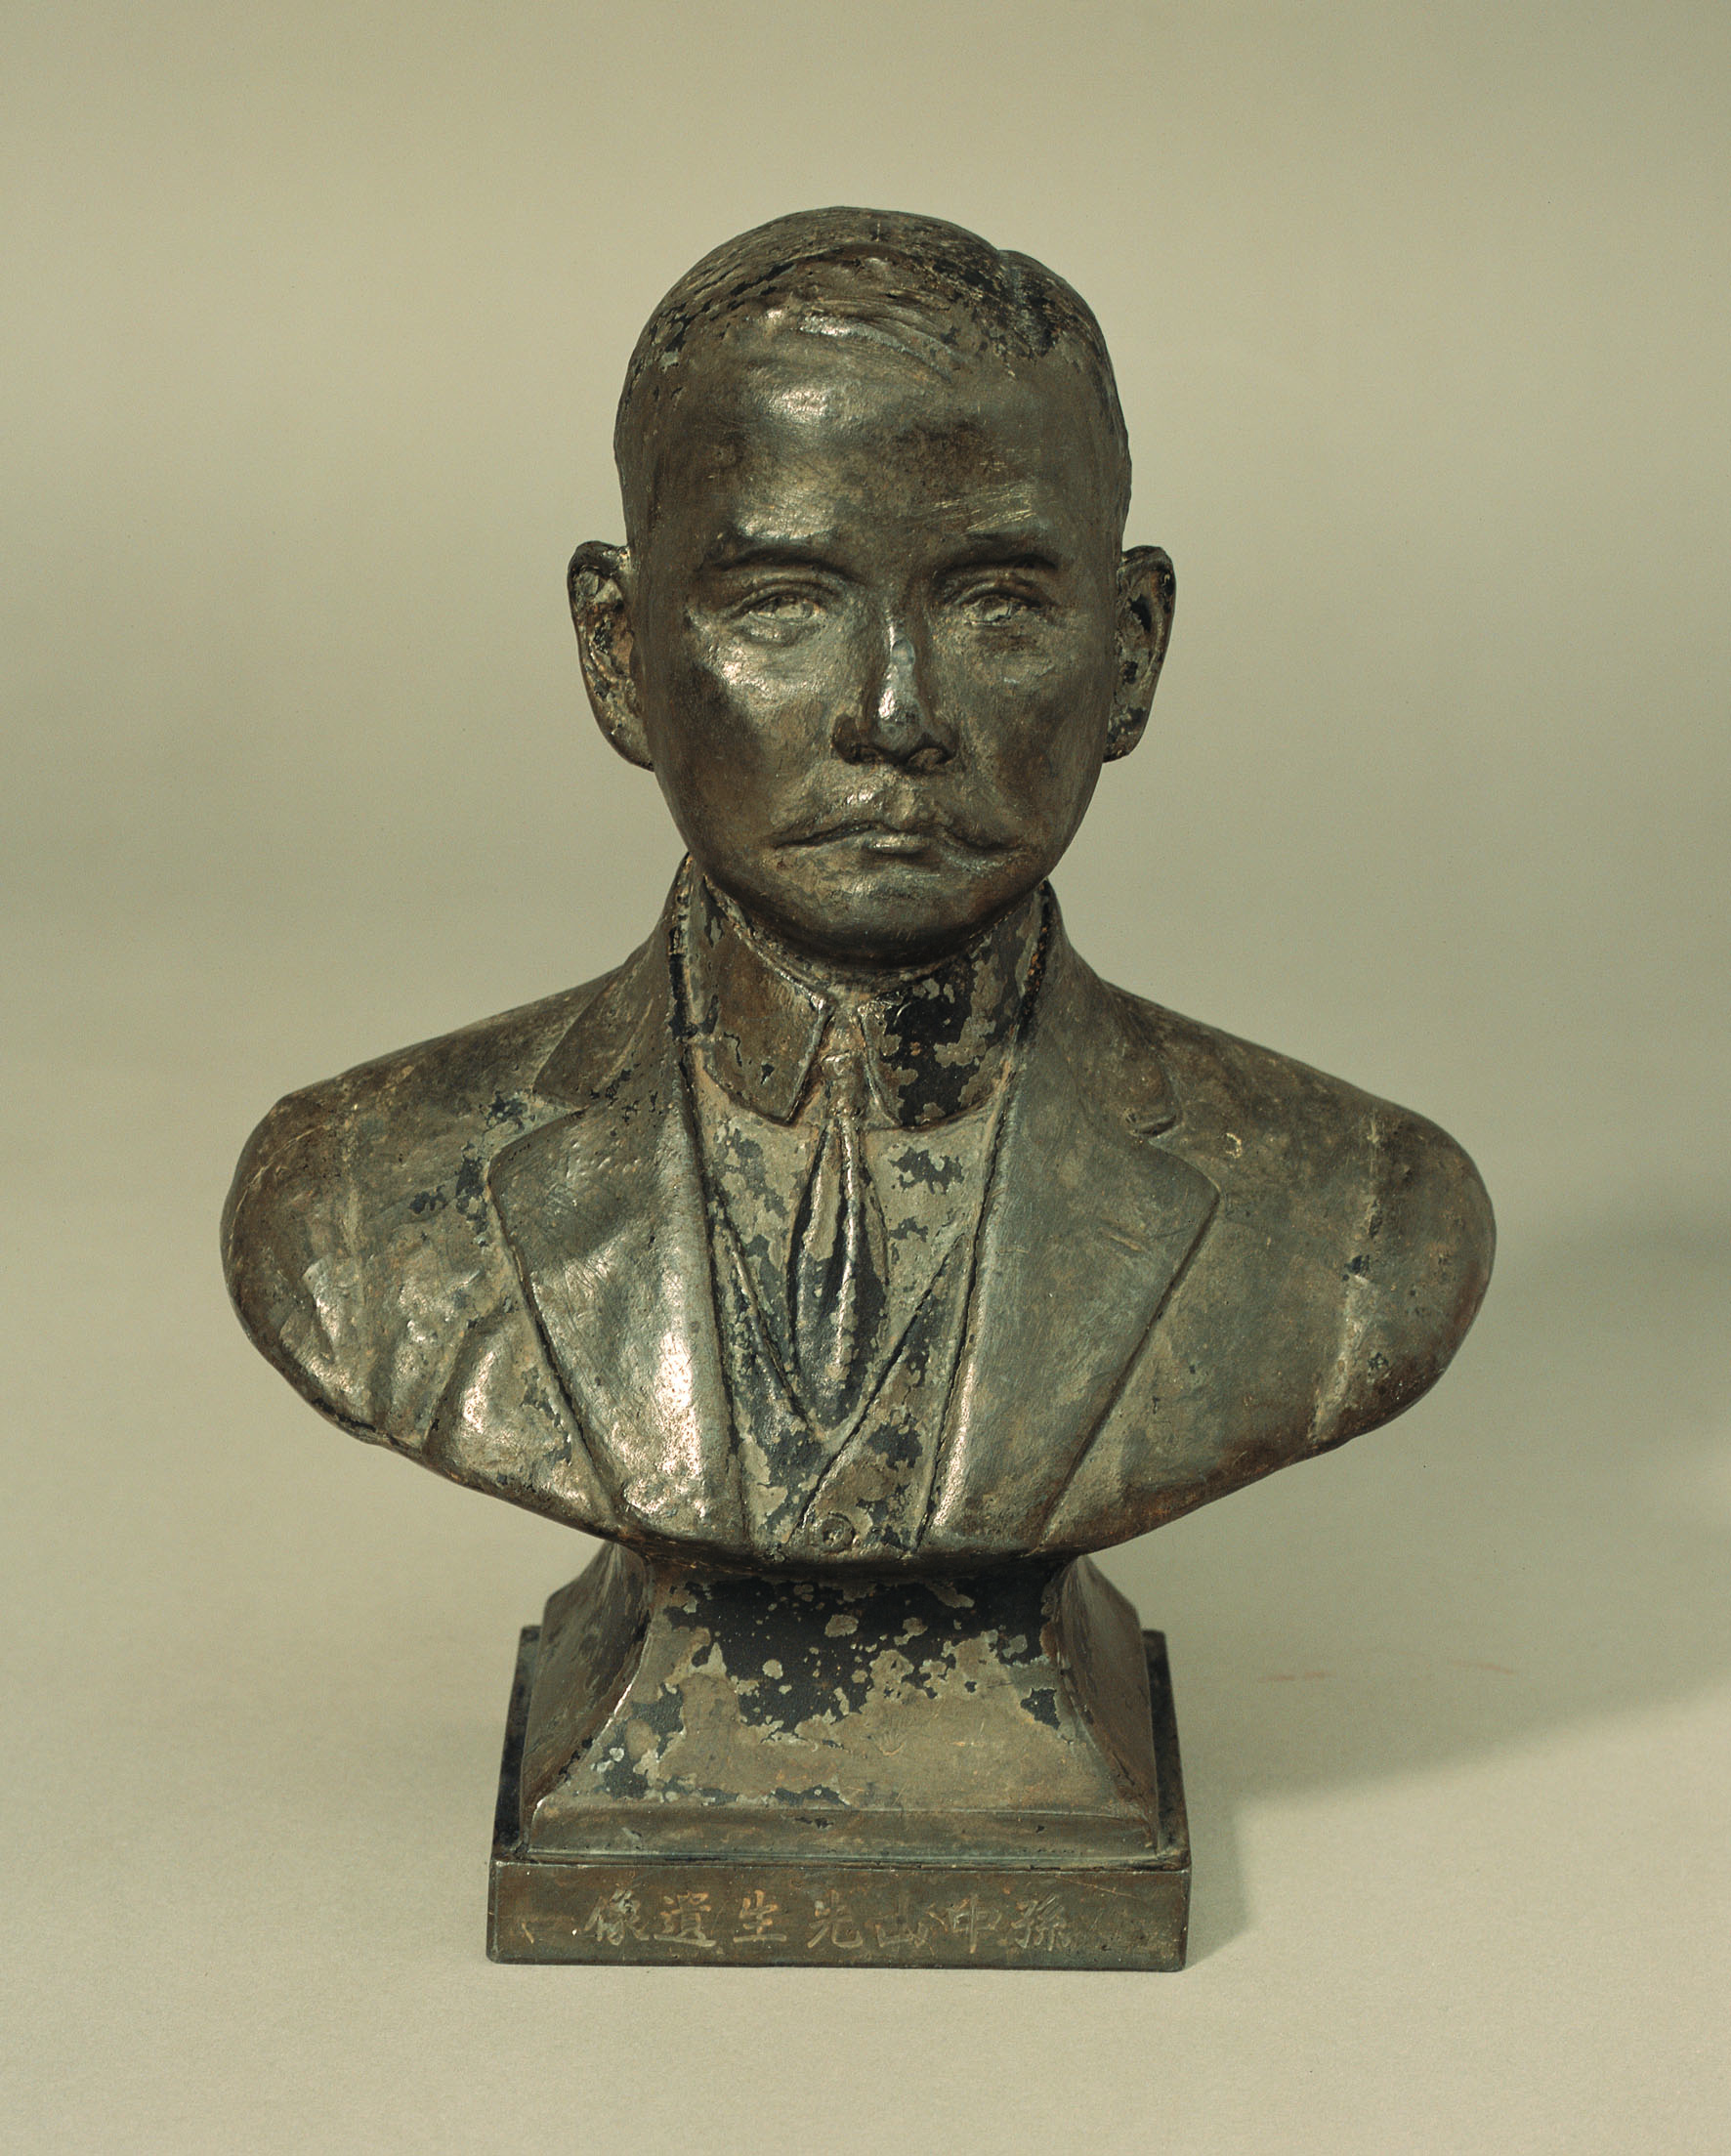 A bronze bust of Dr Sun Yat-sen made at the order of his Japanese friend Umeya Shokichi, 1929.a